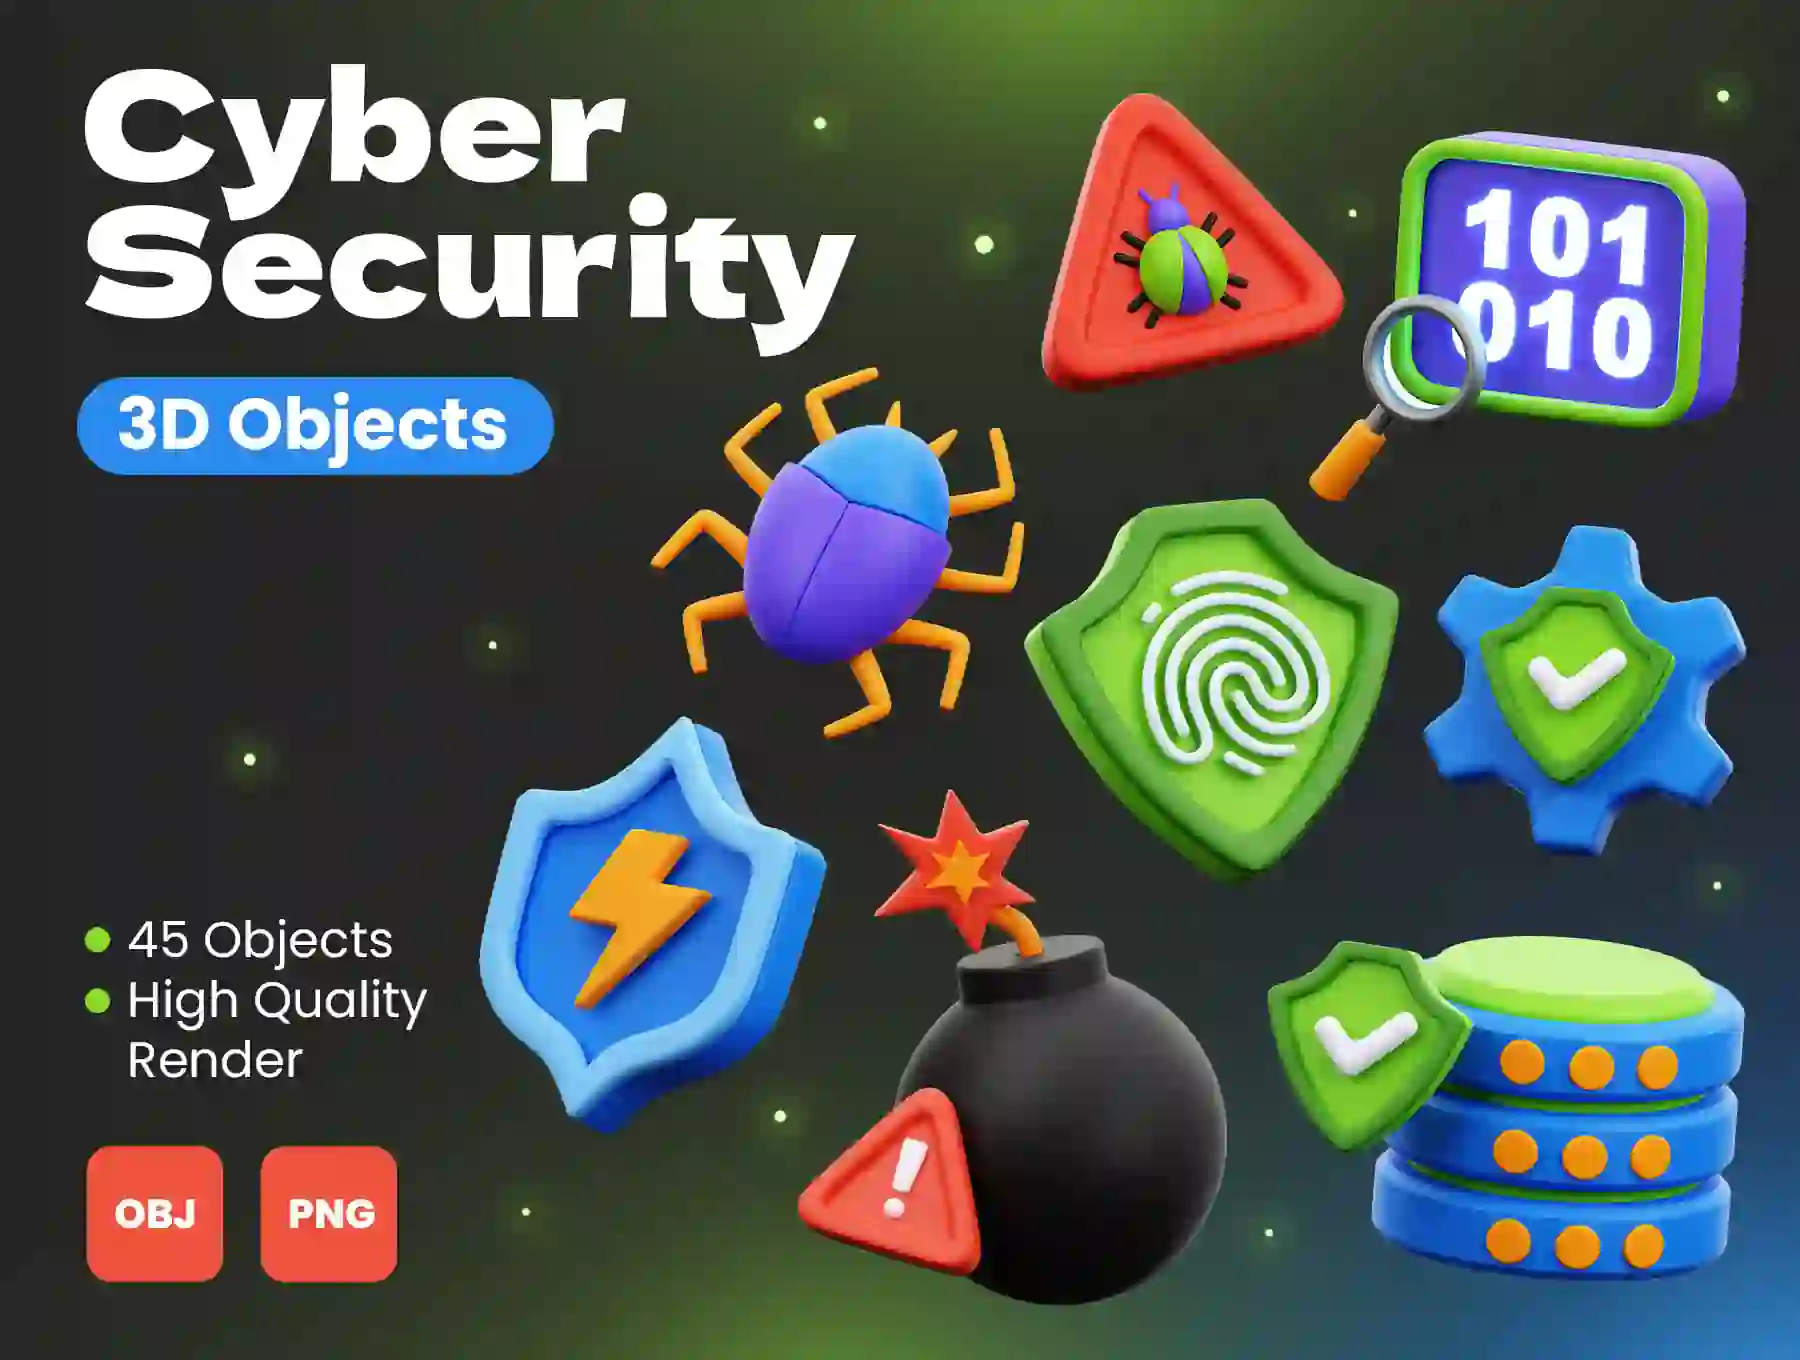 Cyber Security 3D Objects